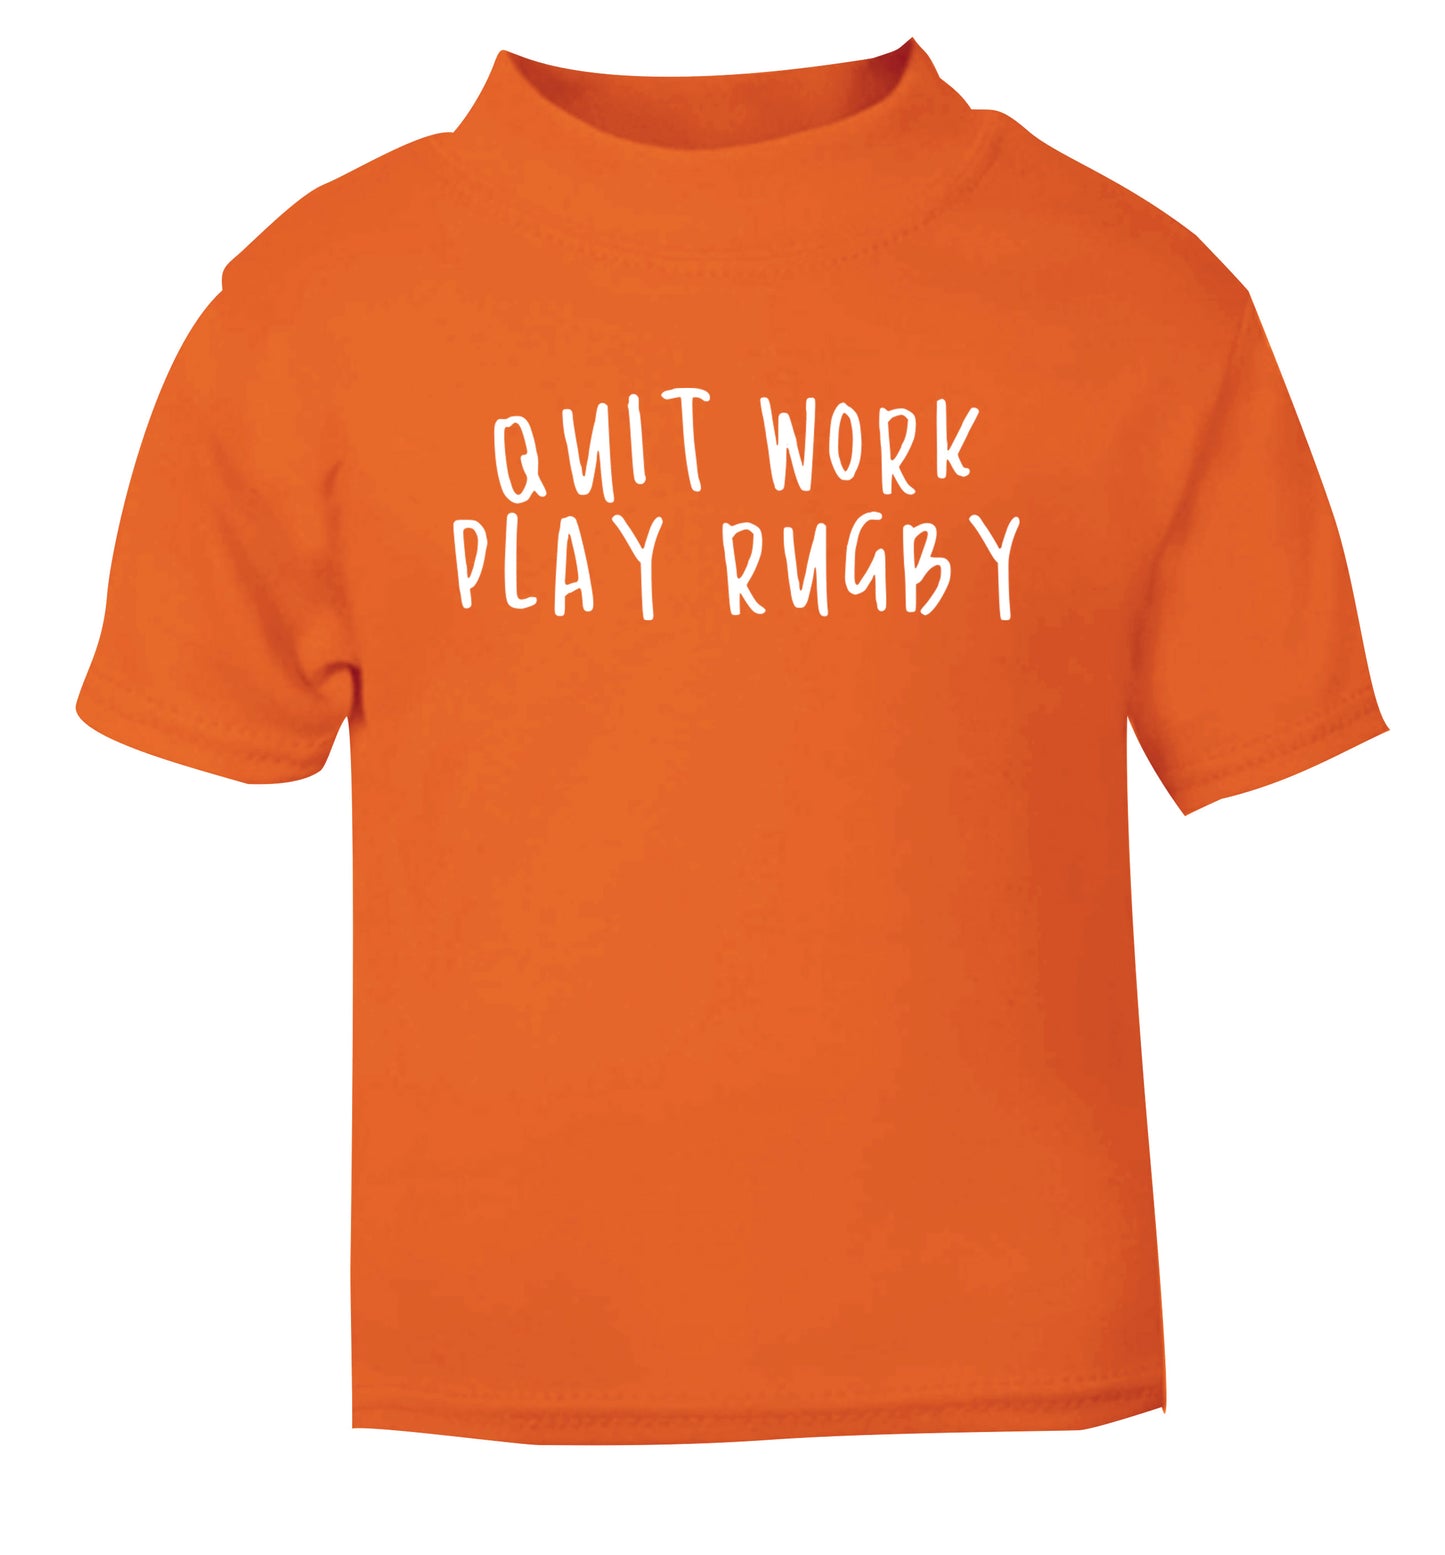 Quit work play rugby orange Baby Toddler Tshirt 2 Years